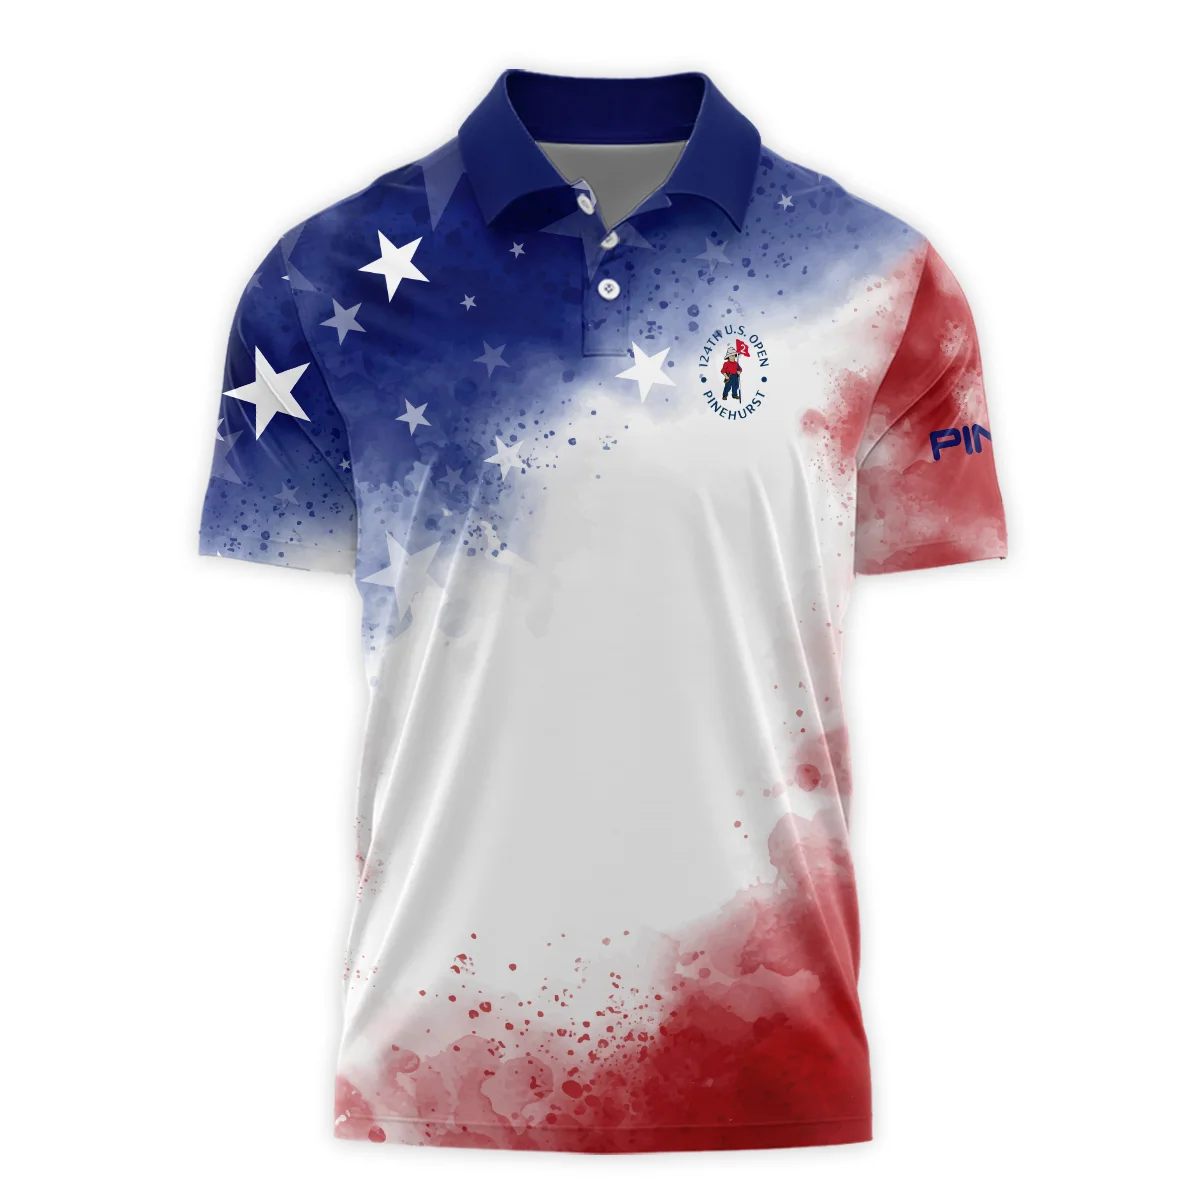 124th U.S. Open Pinehurst Ping Blue Red Watercolor Star White Backgound Polo Shirt Style Classic Polo Shirt For Men